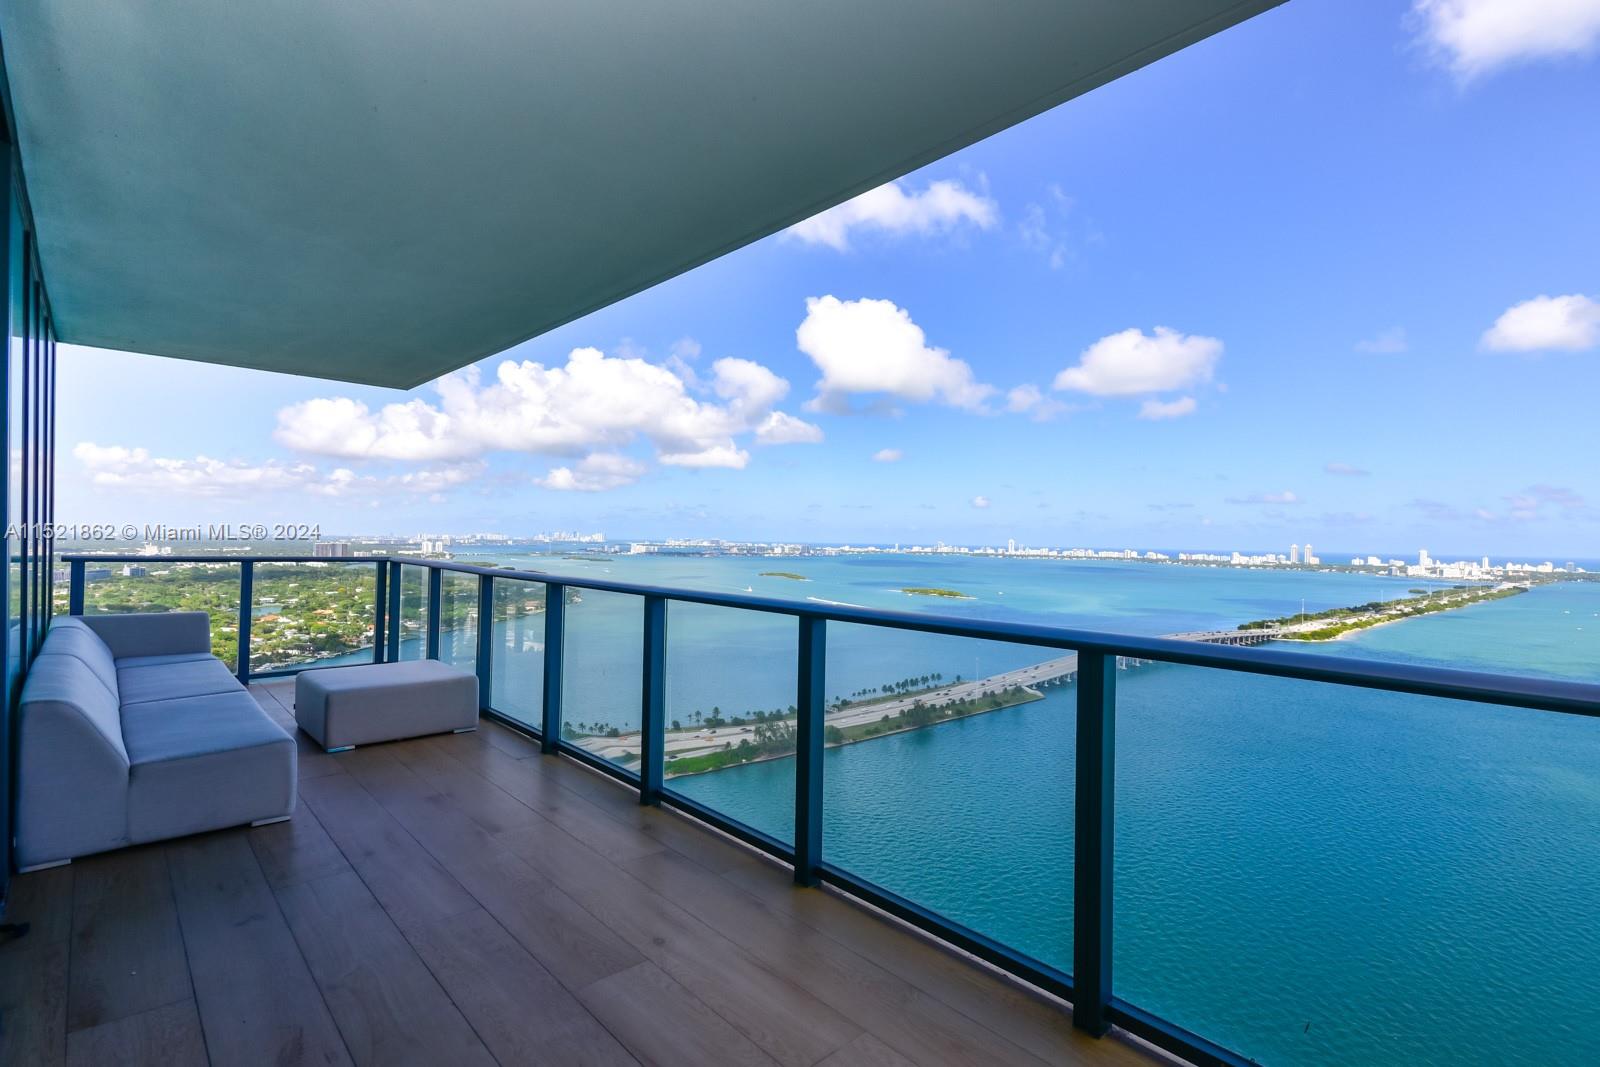 Spectacular corner unit at One Paraiso with unobstructed views of Biscayne Bay. This 3 bedroom, 3.5 bathroom with 4 parking spaces, one storage, features a private foyer with private elevator access. Sub-zero and wolf appliances, European cabinetry, two private balconies with floor to ceiling windows. One Paraiso amenities include: Award winning Amara restaurant on-site, state of the art gym, pool, tennis courts, steam and sauna, children’s playroom, theater room, concierge, and valet. One Paraiso is located at Edgewater, minutes away from Miami Beach, Midtown, and Miami Design District.